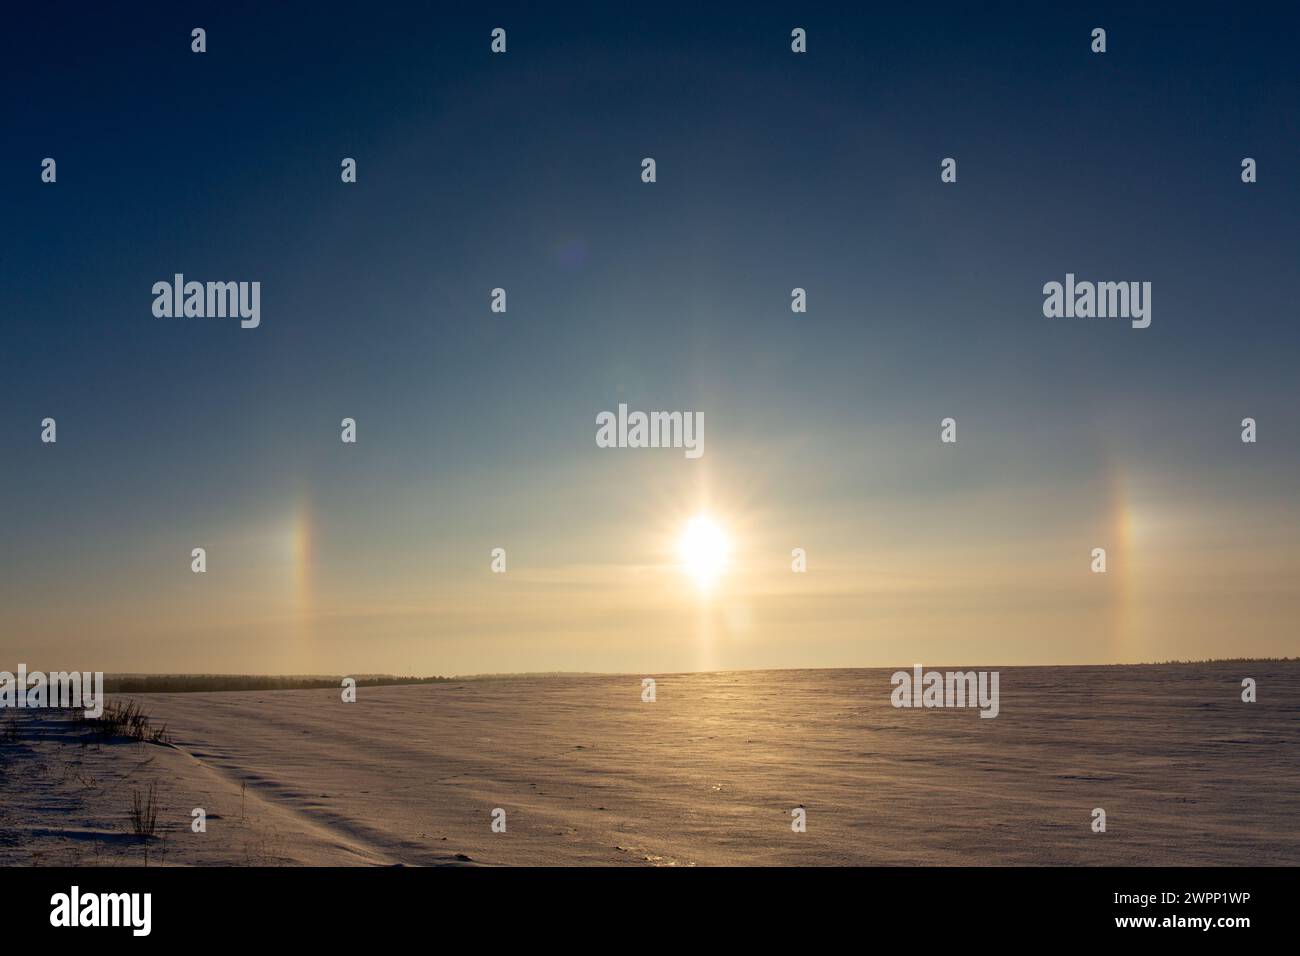 Winter landscape with circular halo phenomena around the sun in form of colored rings in Grodno, Belarus. Stock Photo